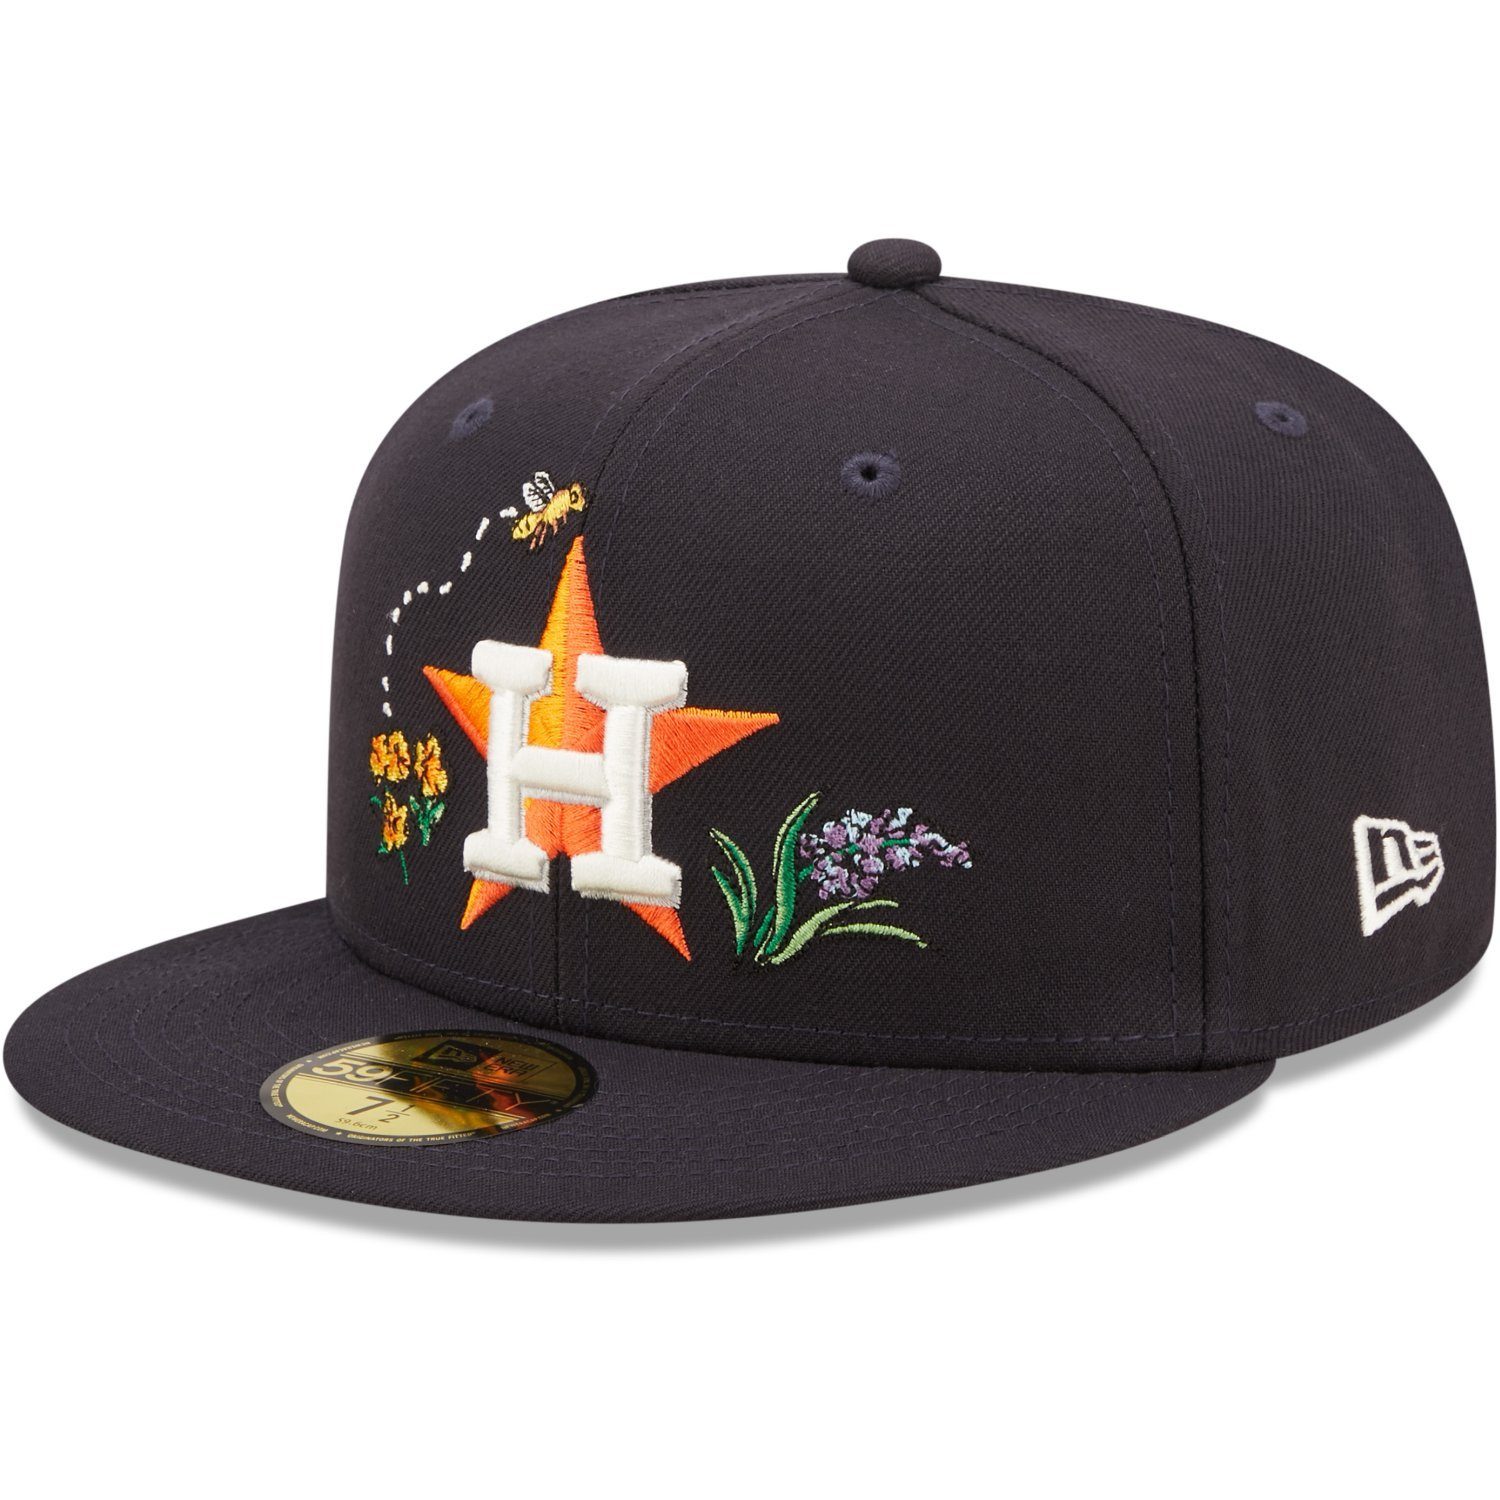 New Era Fitted Cap 59Fifty WATER FLORAL Houston Astros